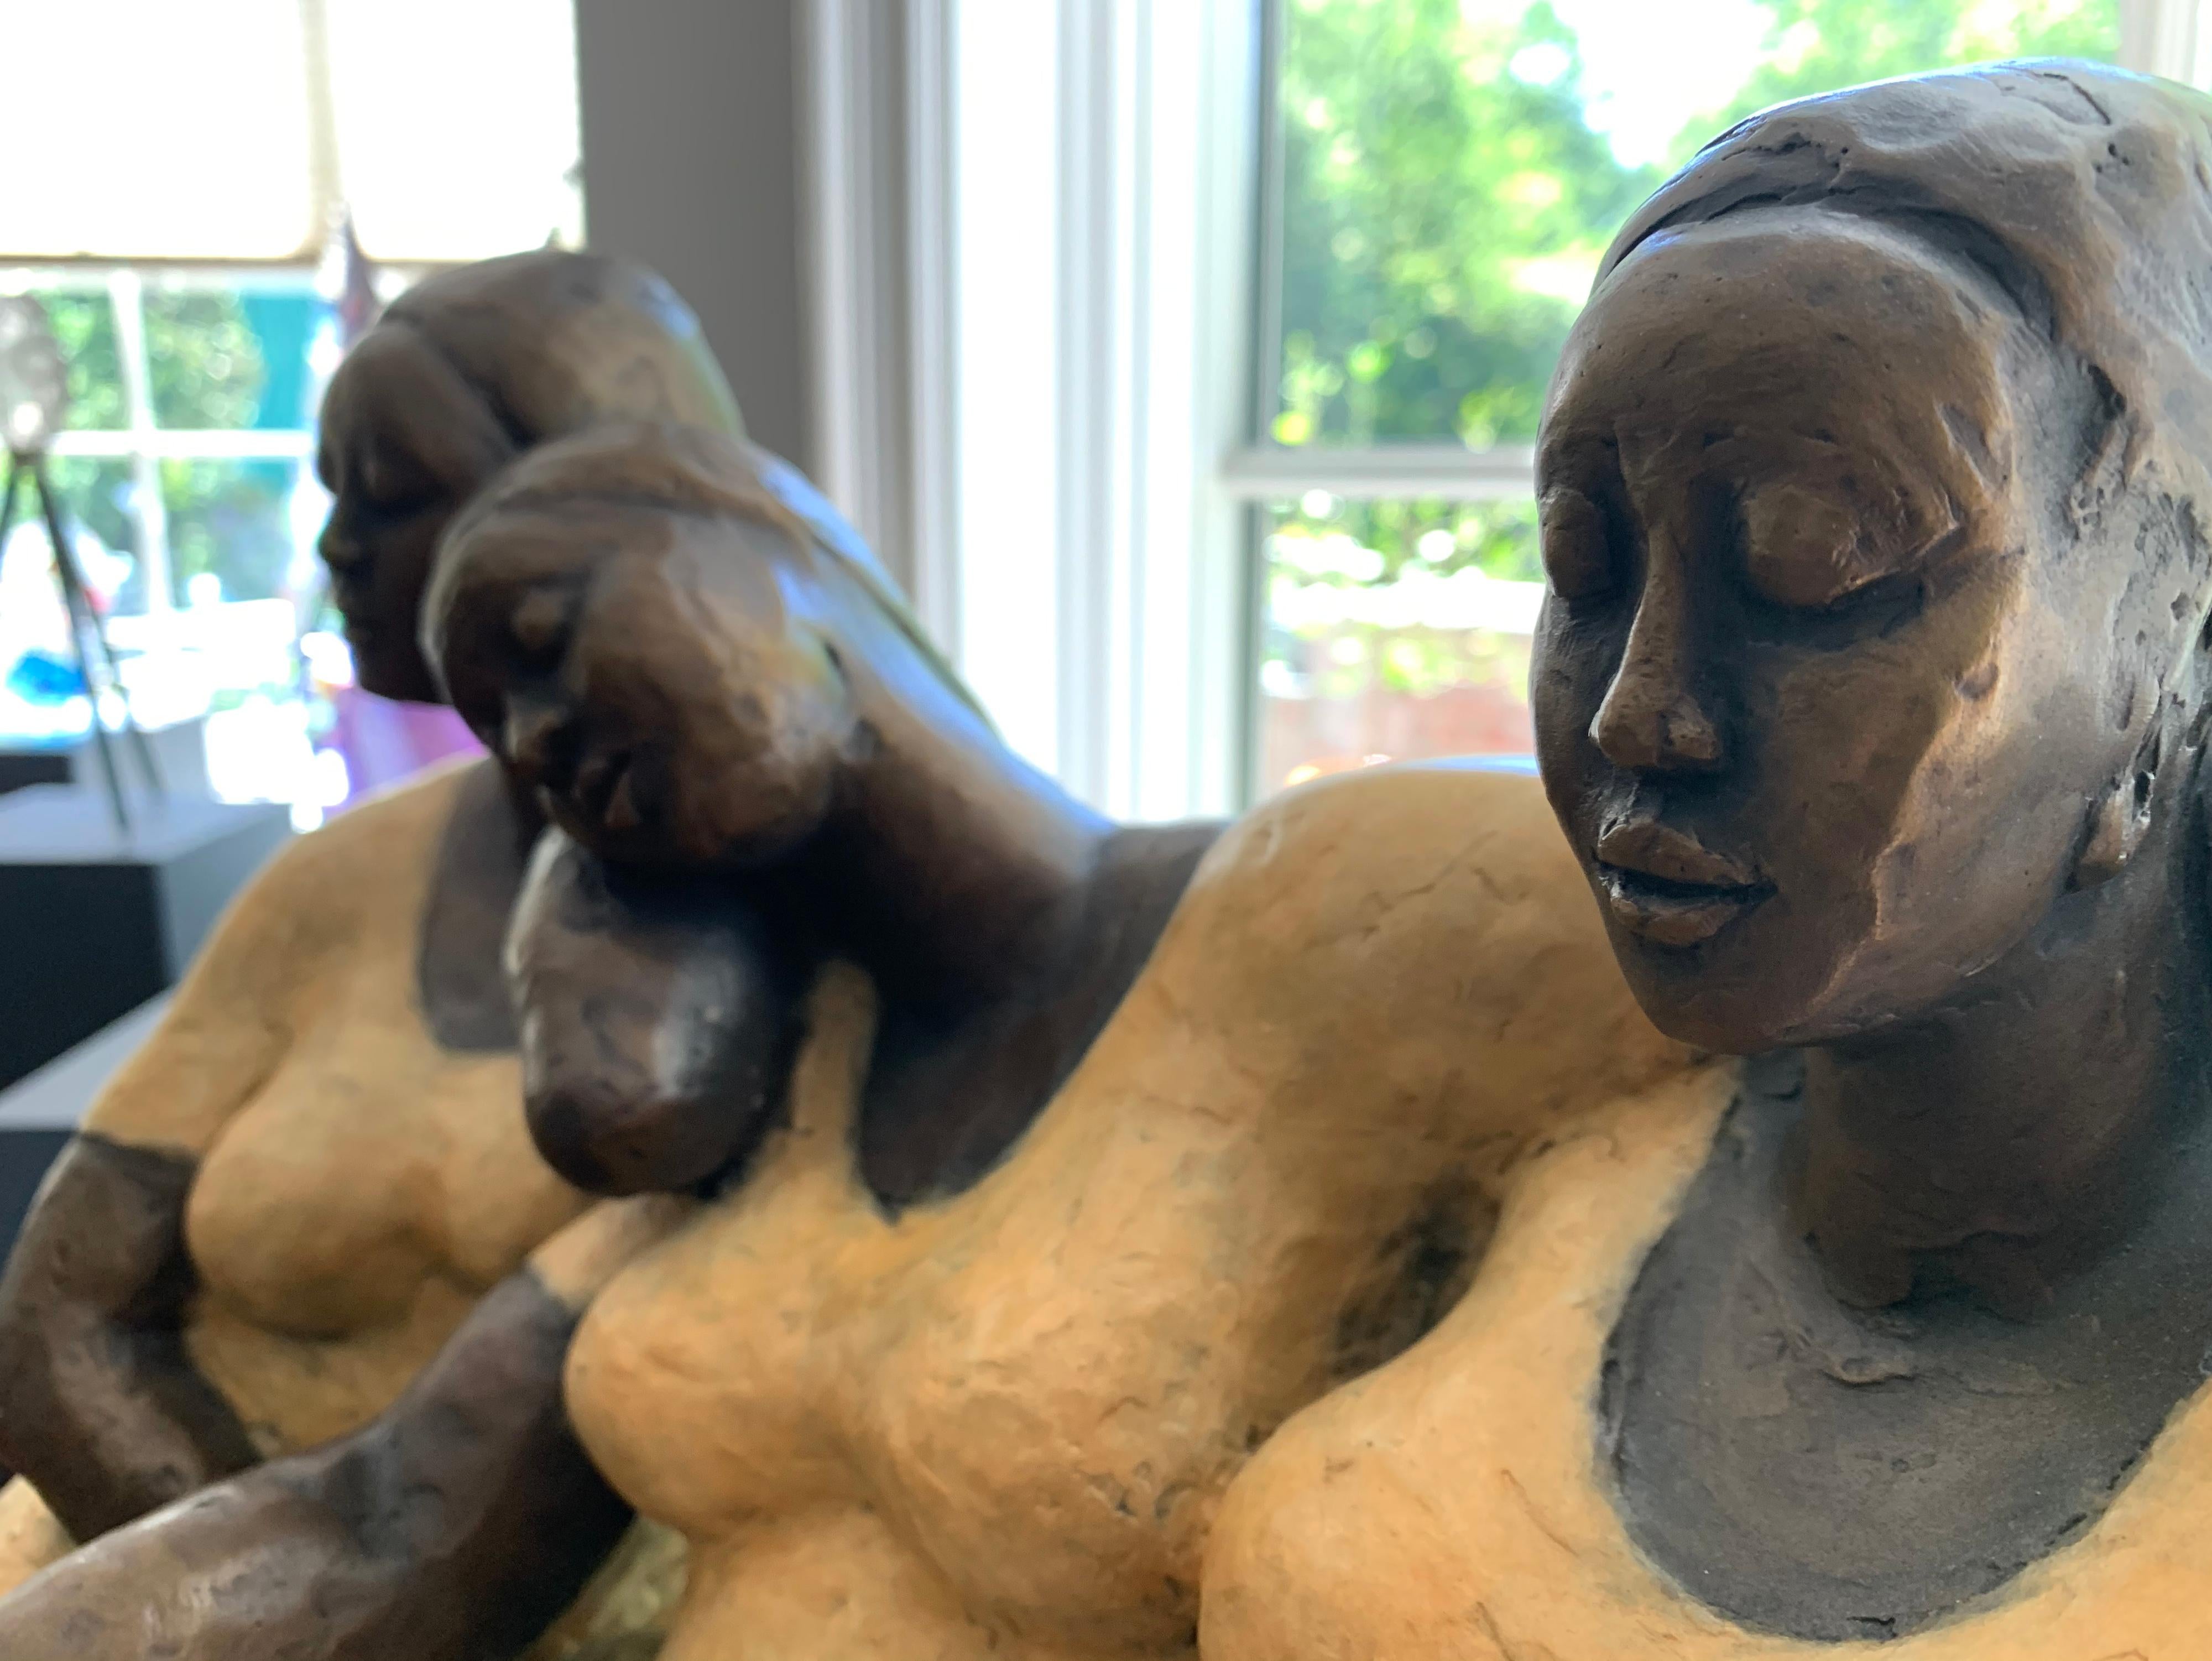 Nnamdi Okowkwo's stylized seated woman in an attitude of tranquility. To create it, he first sculpts the figure in clay, then casts it in bronze using the lost wax technique. A hot patina is applied using compounds that are specifically formulated